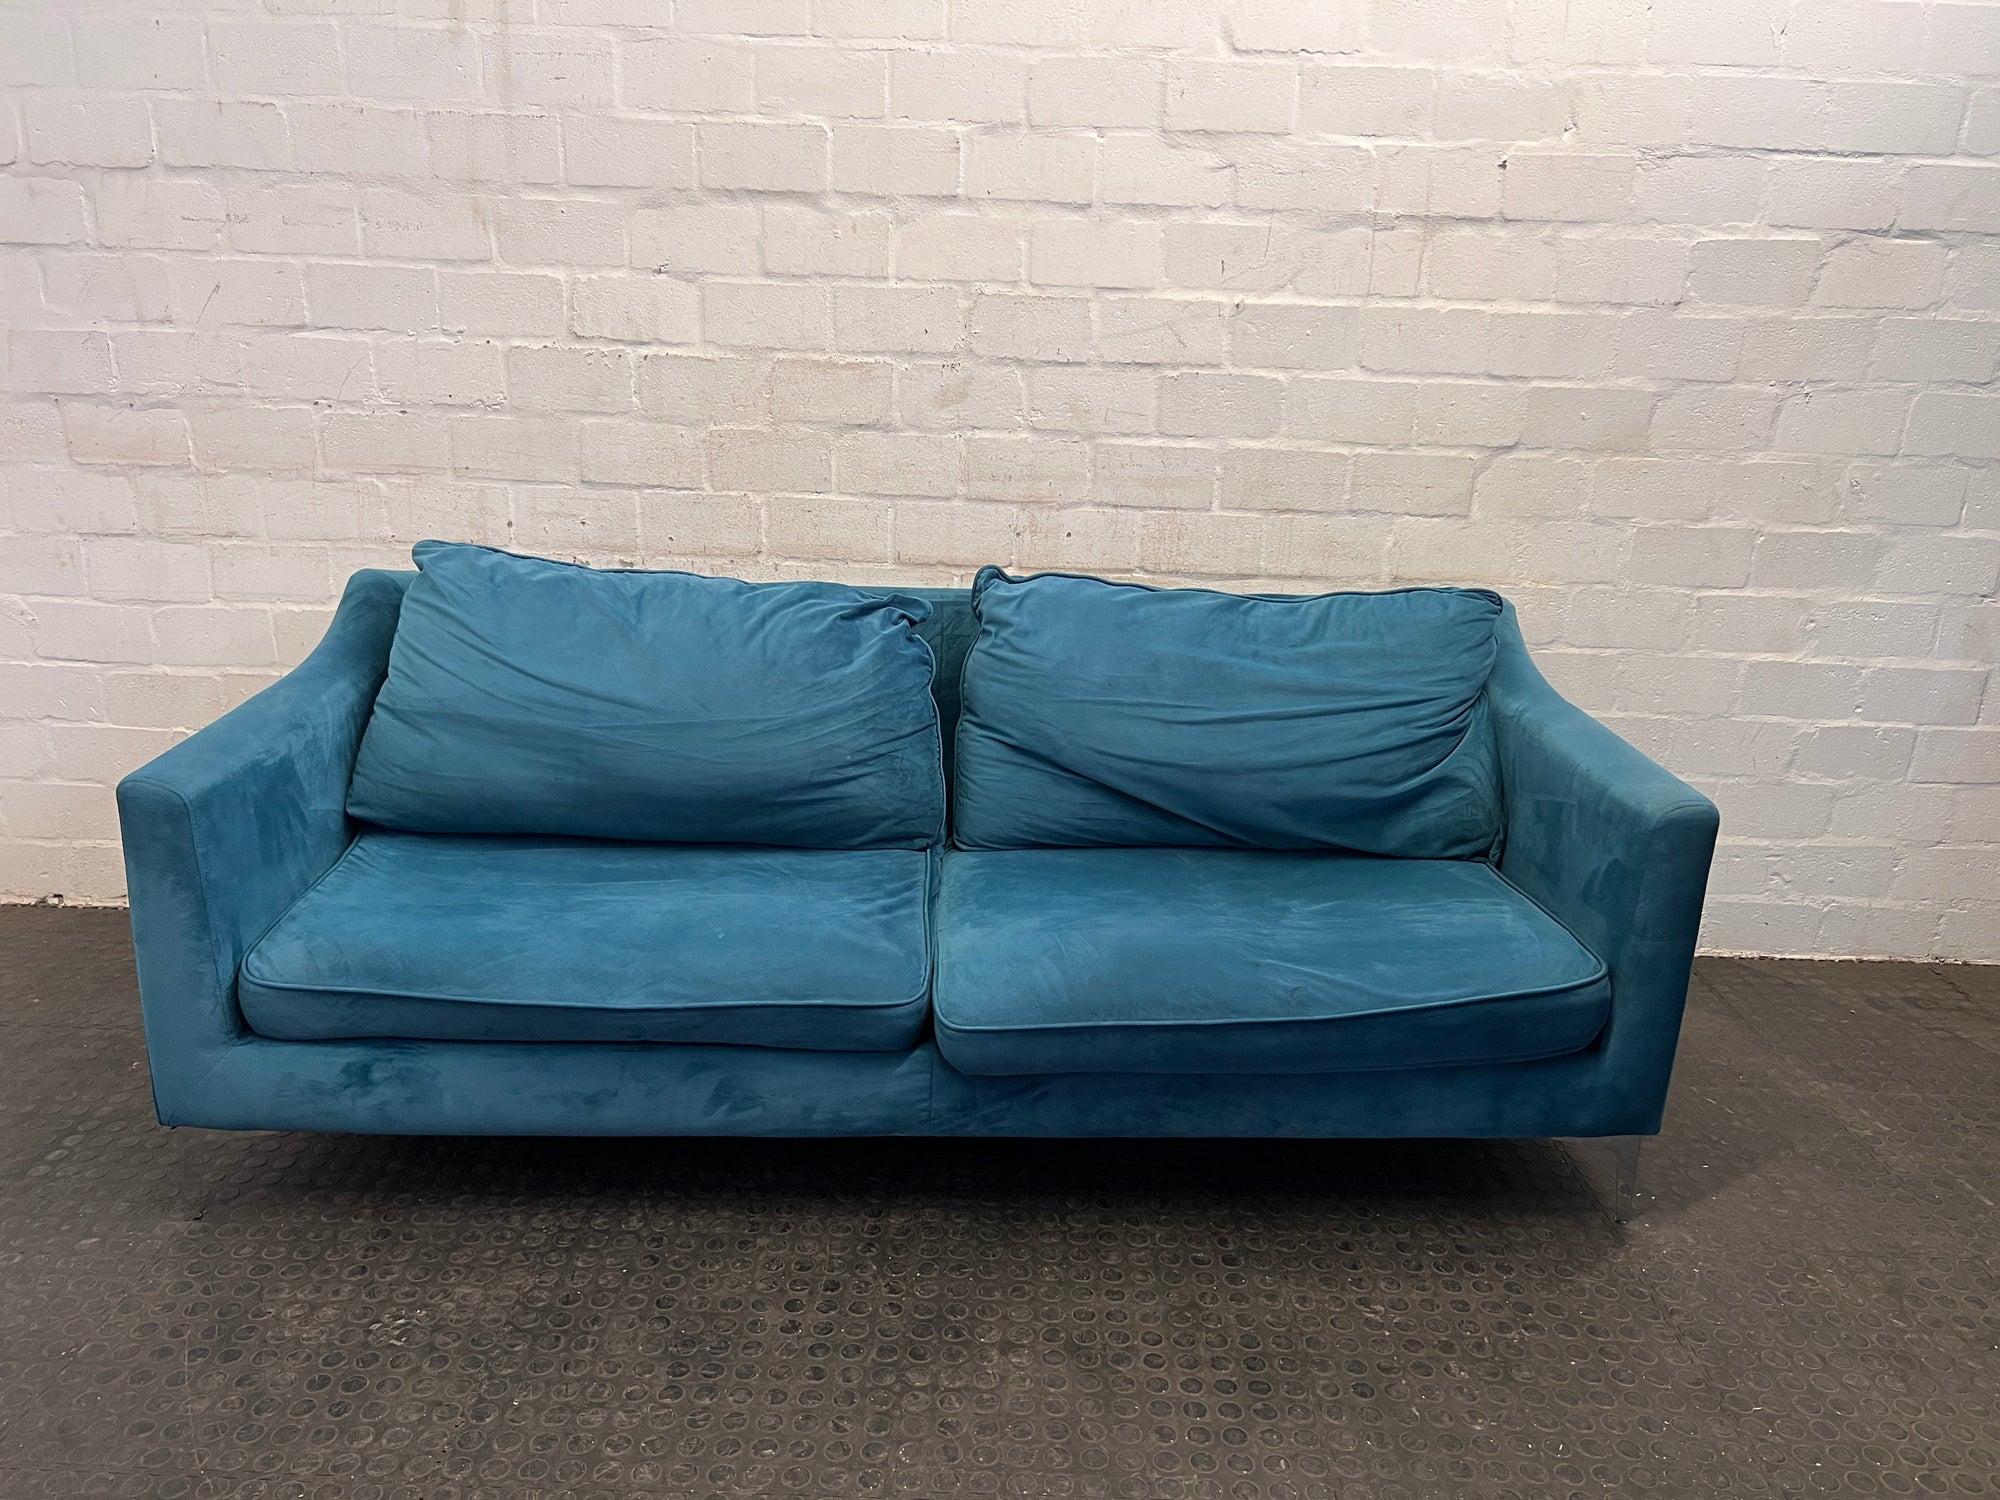 Blue Turquoise Two Seater Couch - REDUCED